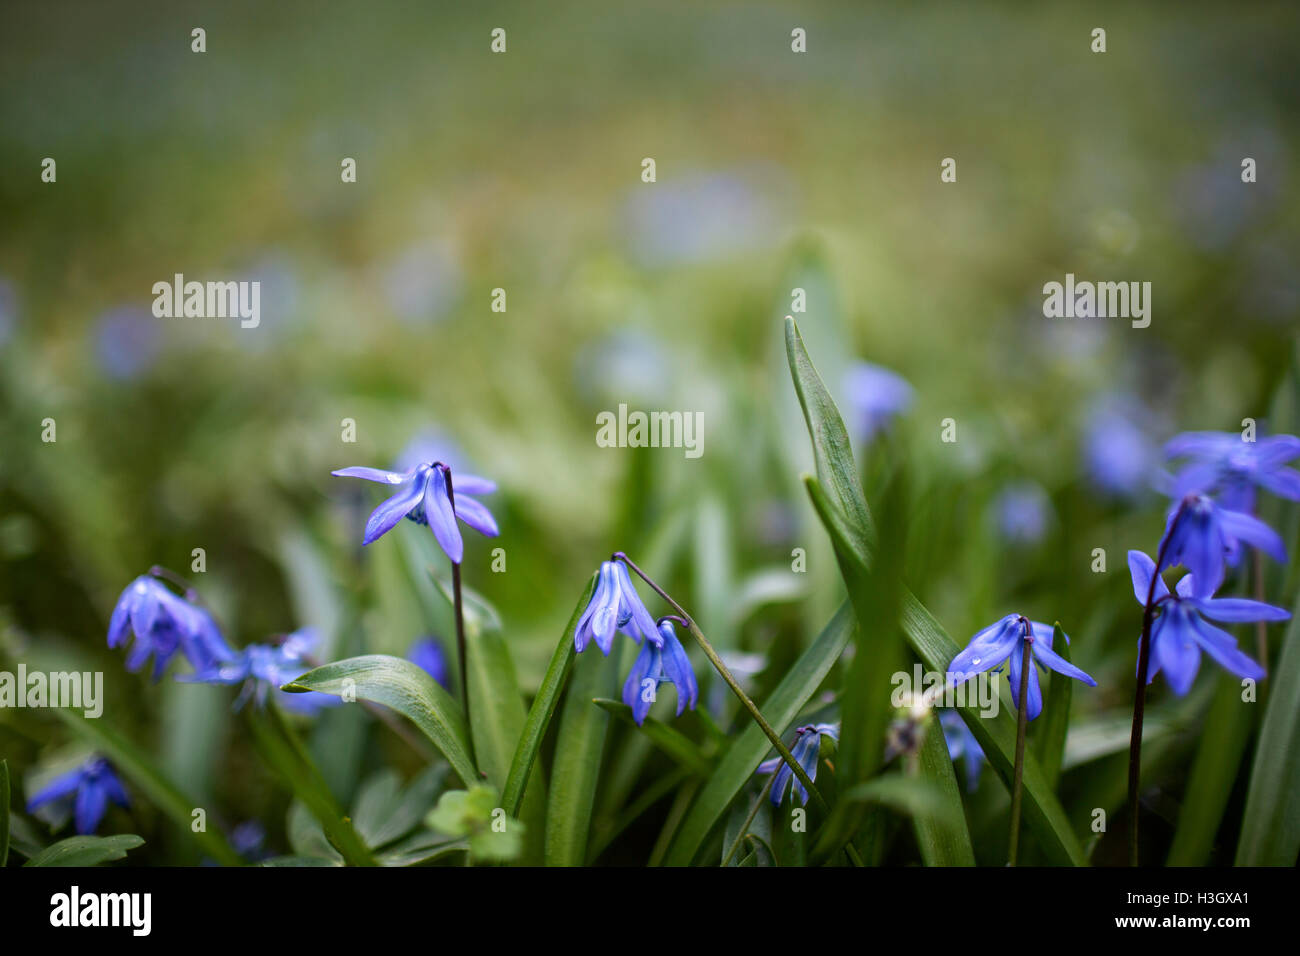 Group of Blue Scilla Flowers in early Spring Time Stock Photo